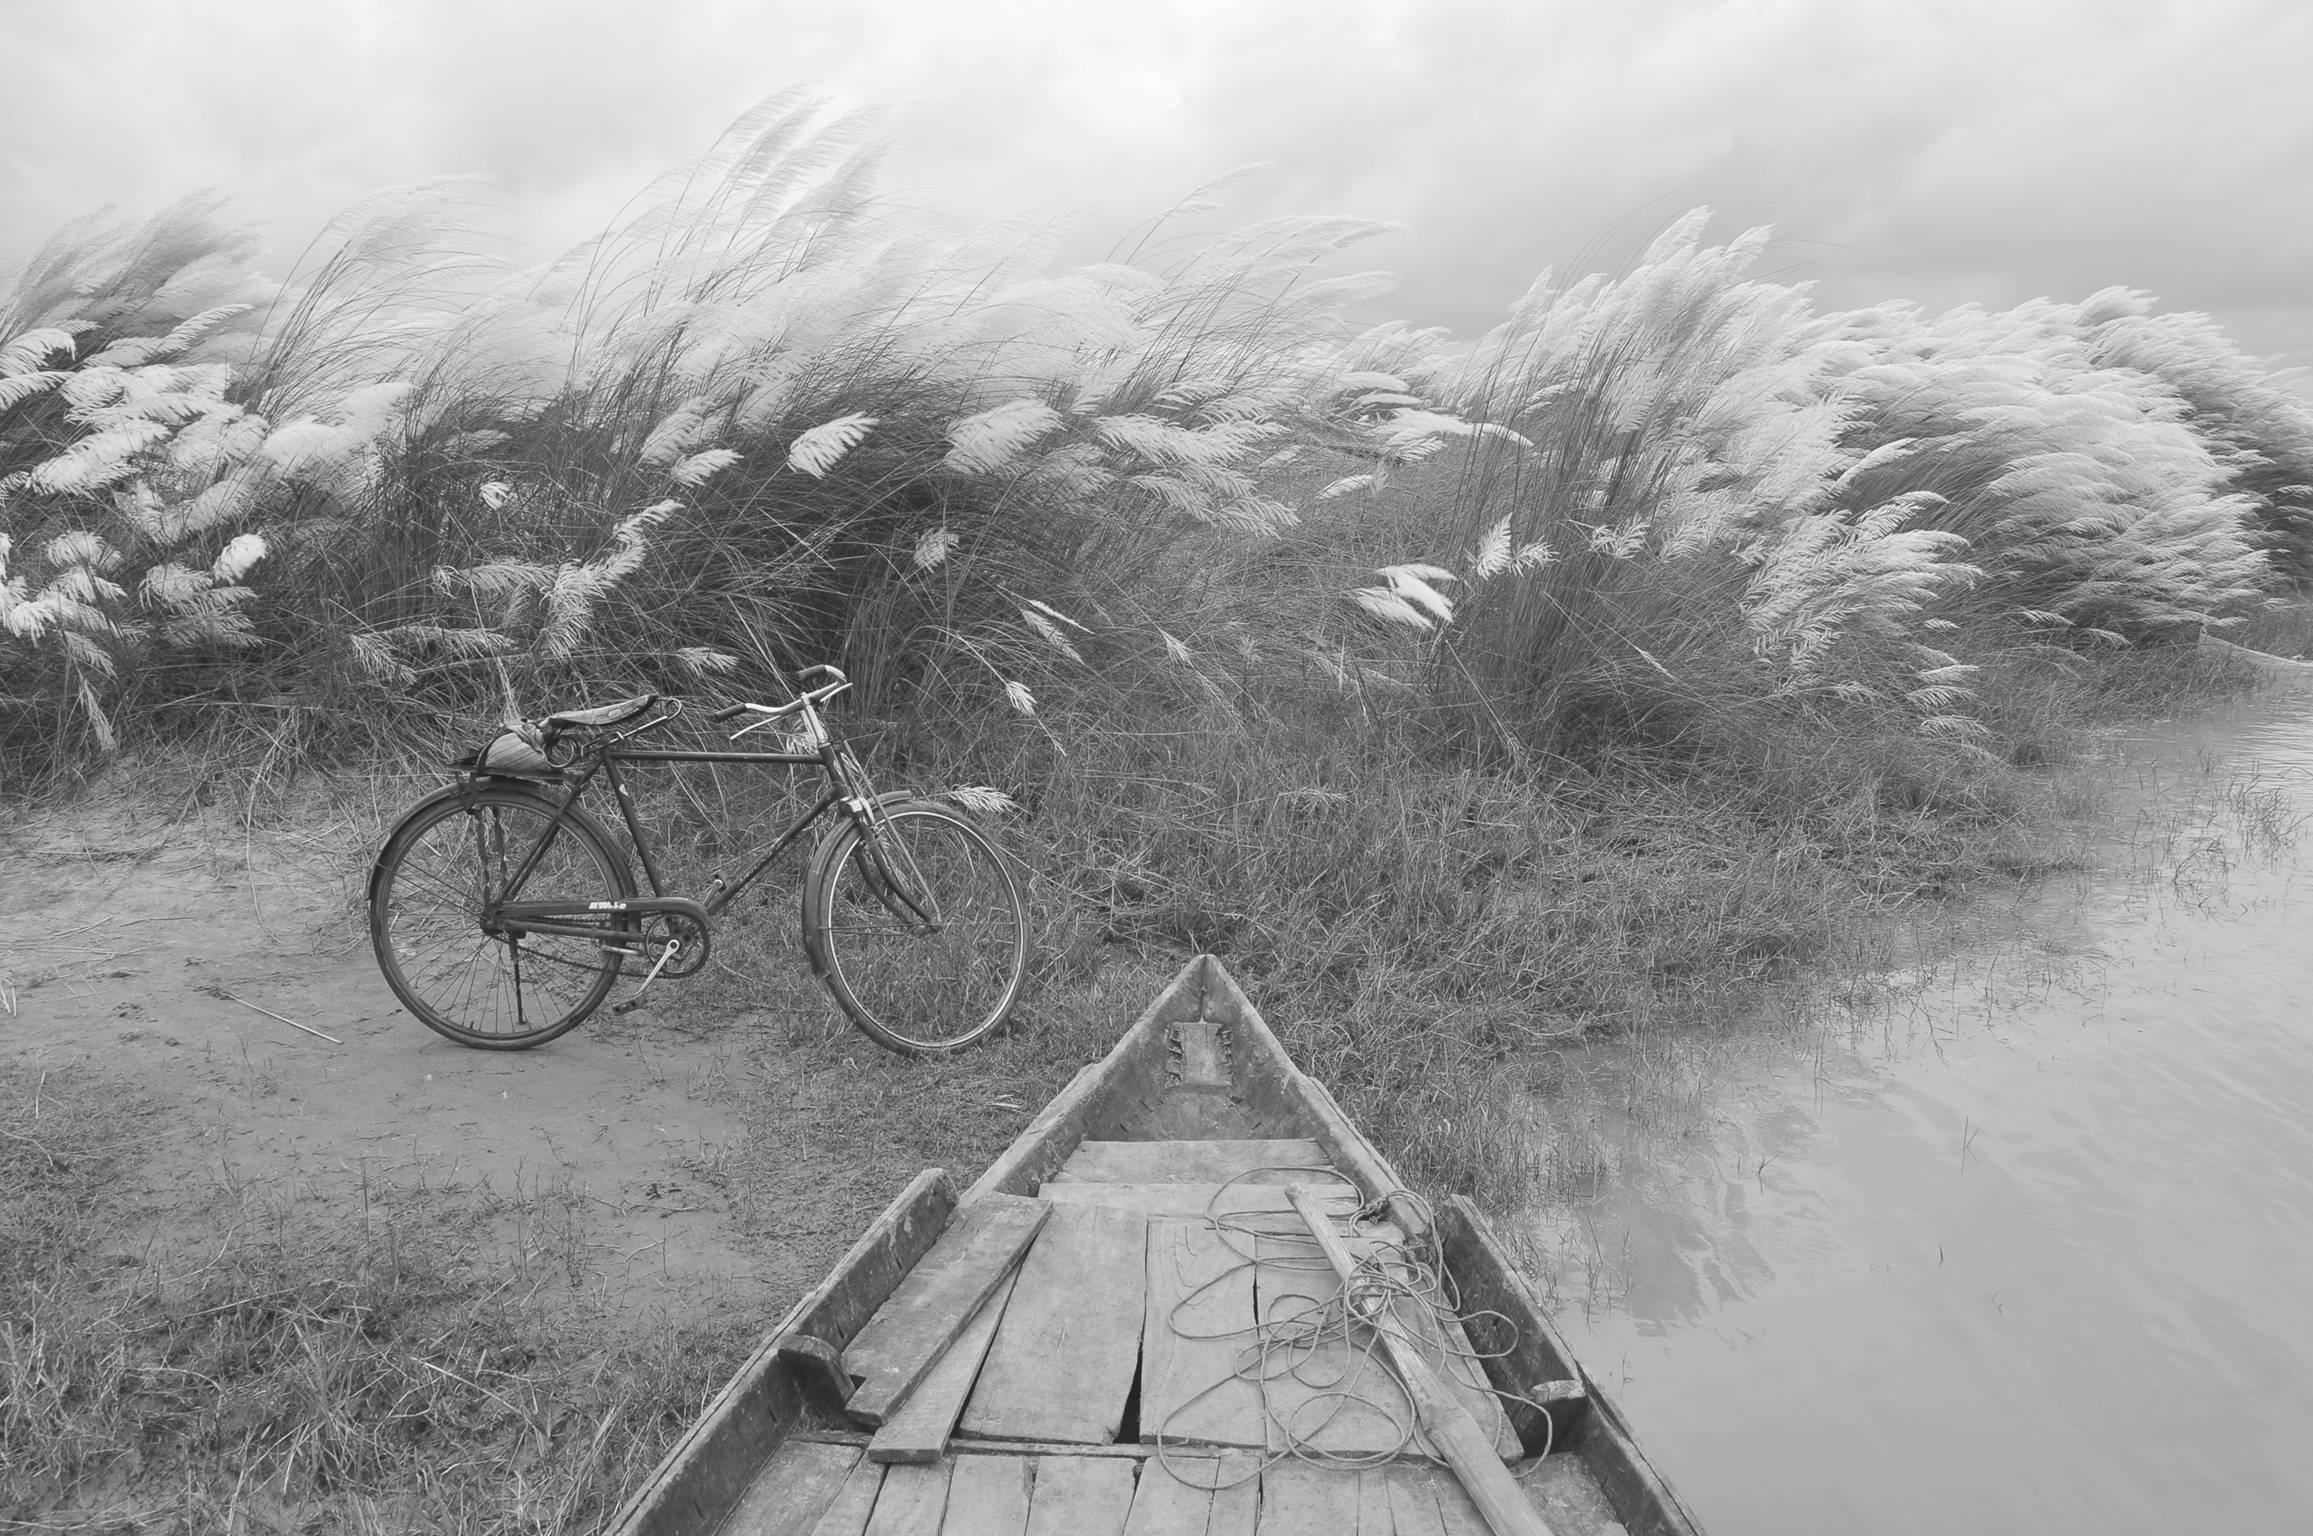 Mohan L. Mazumder Black and White Photograph - Rural Scenery, Kans Grass, Boat, Bicycle, Black & White Photography "In Stock"